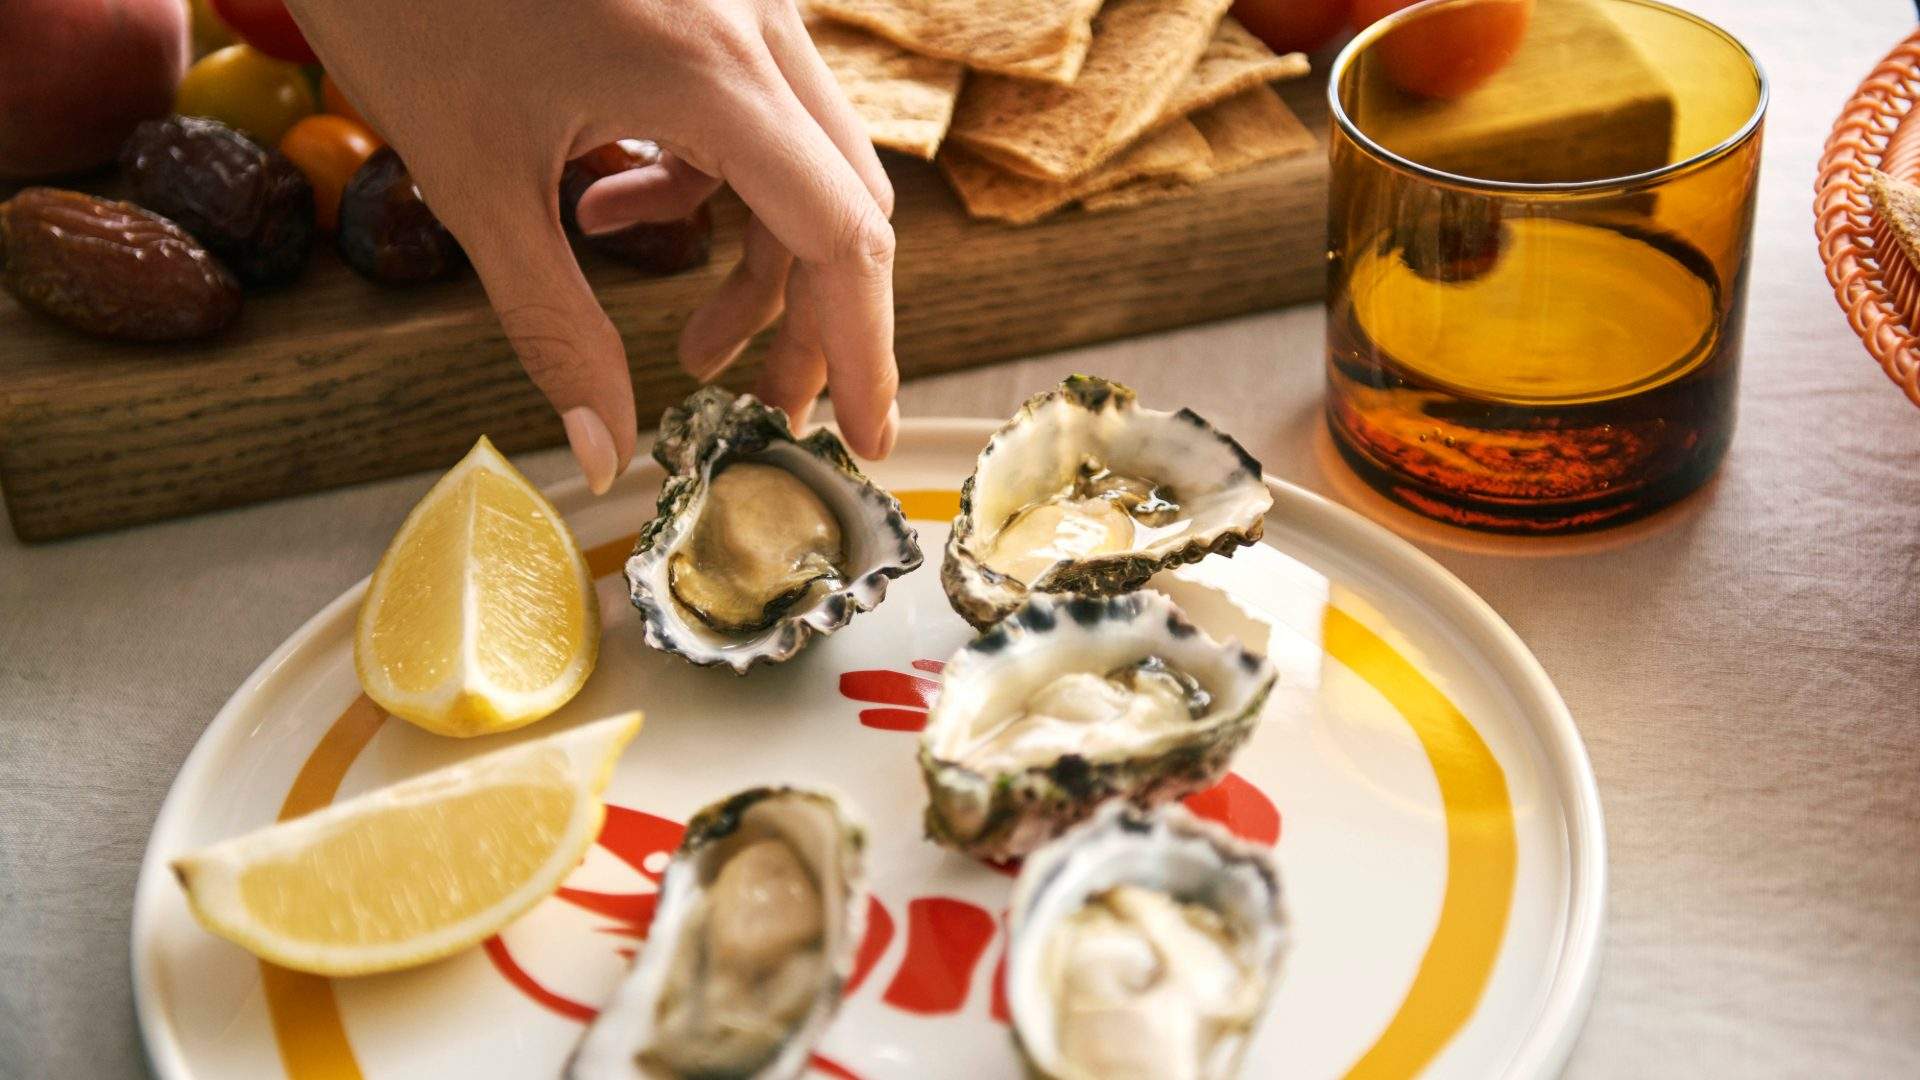 East 33 Is Sydney's New Home-Delivery Service Dropping A-Class Oysters to Your Doorstep